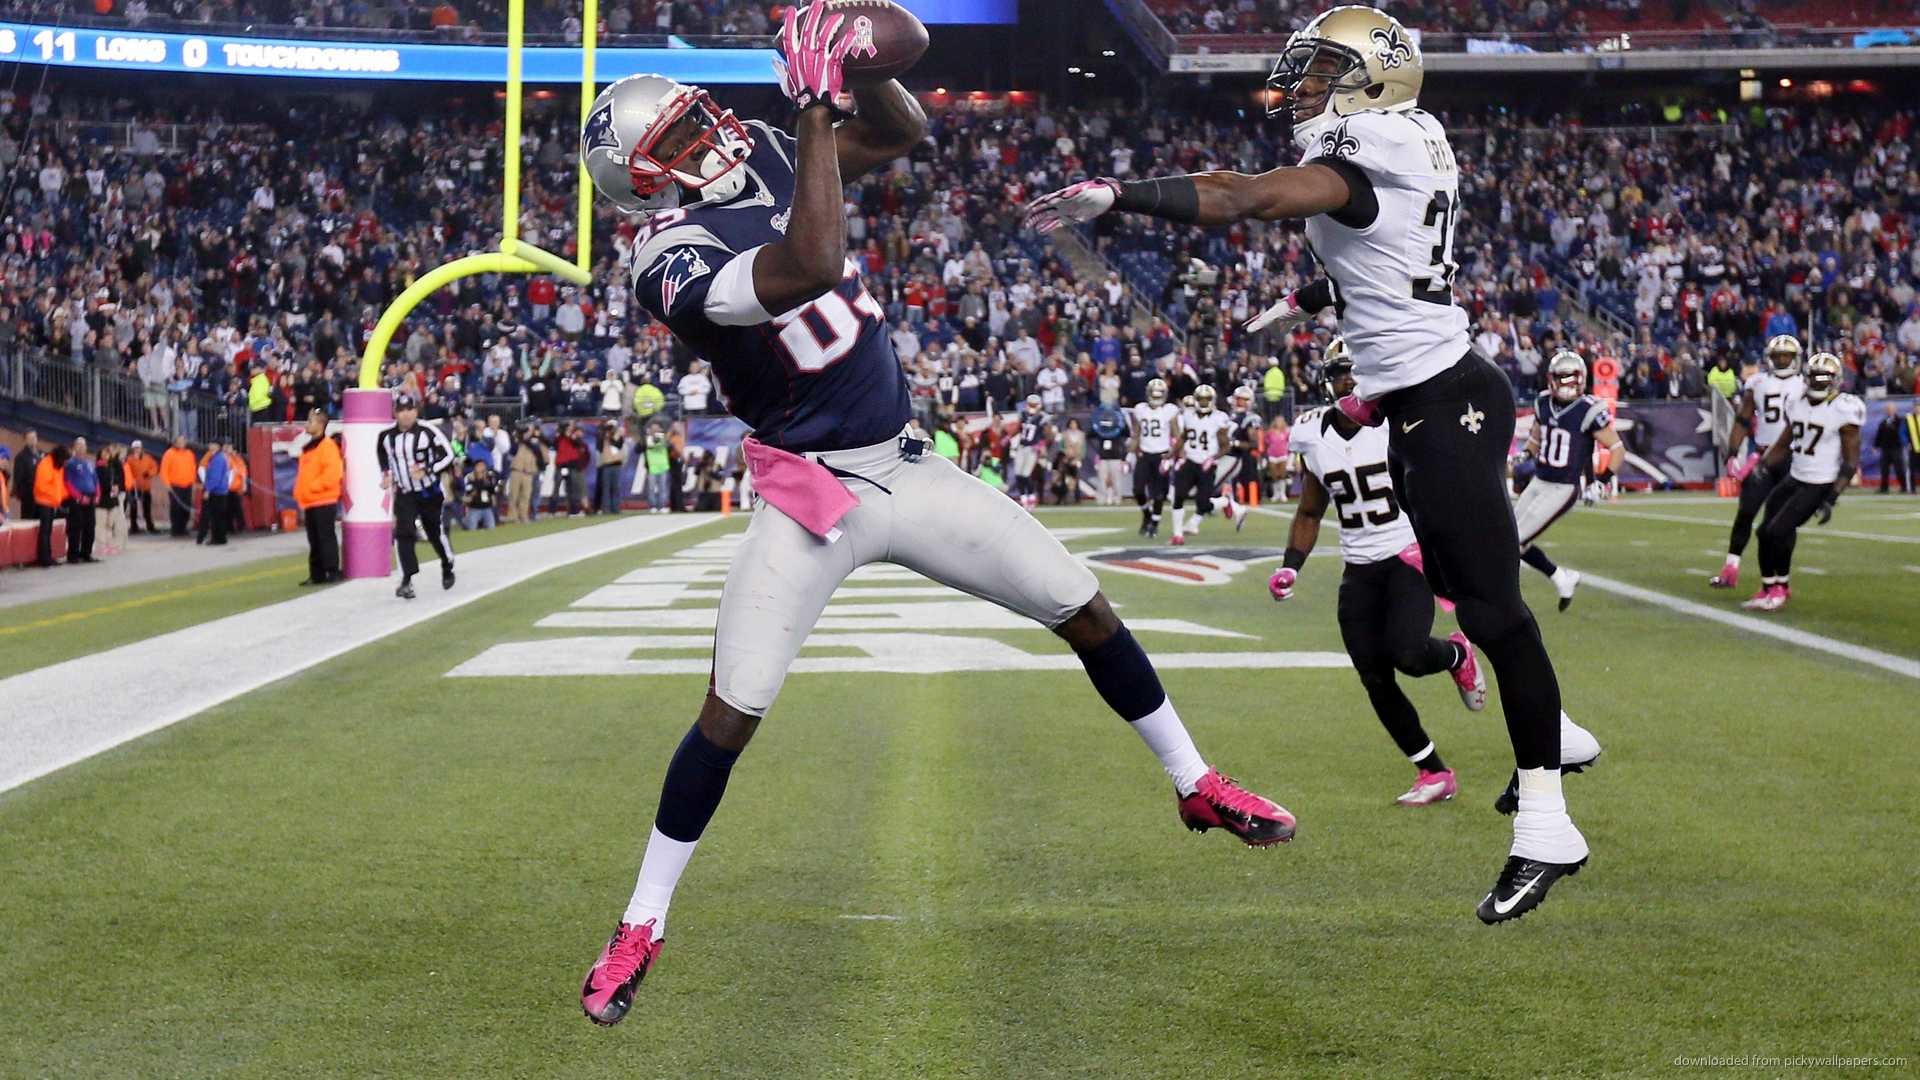 1920x1080 New England Patriots Touchdown picture